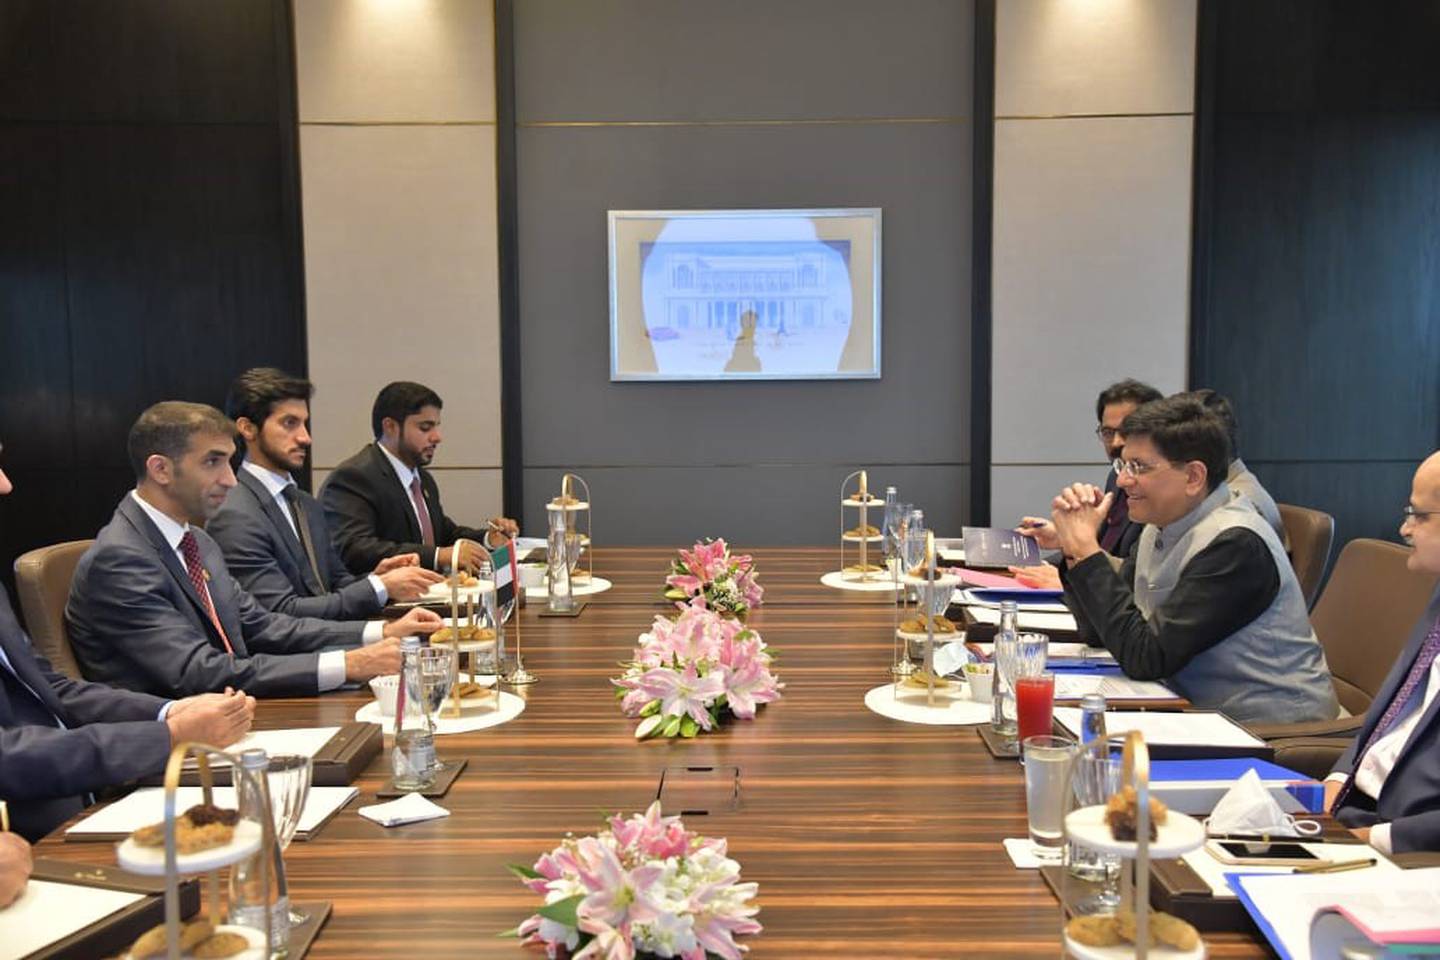 Thani Al Zeyoudi, the UAE's Minister of State for Foreign Trade, led an official delegation to New Delhi for CEPA talks. Photo: UAE Ministry of Economy 